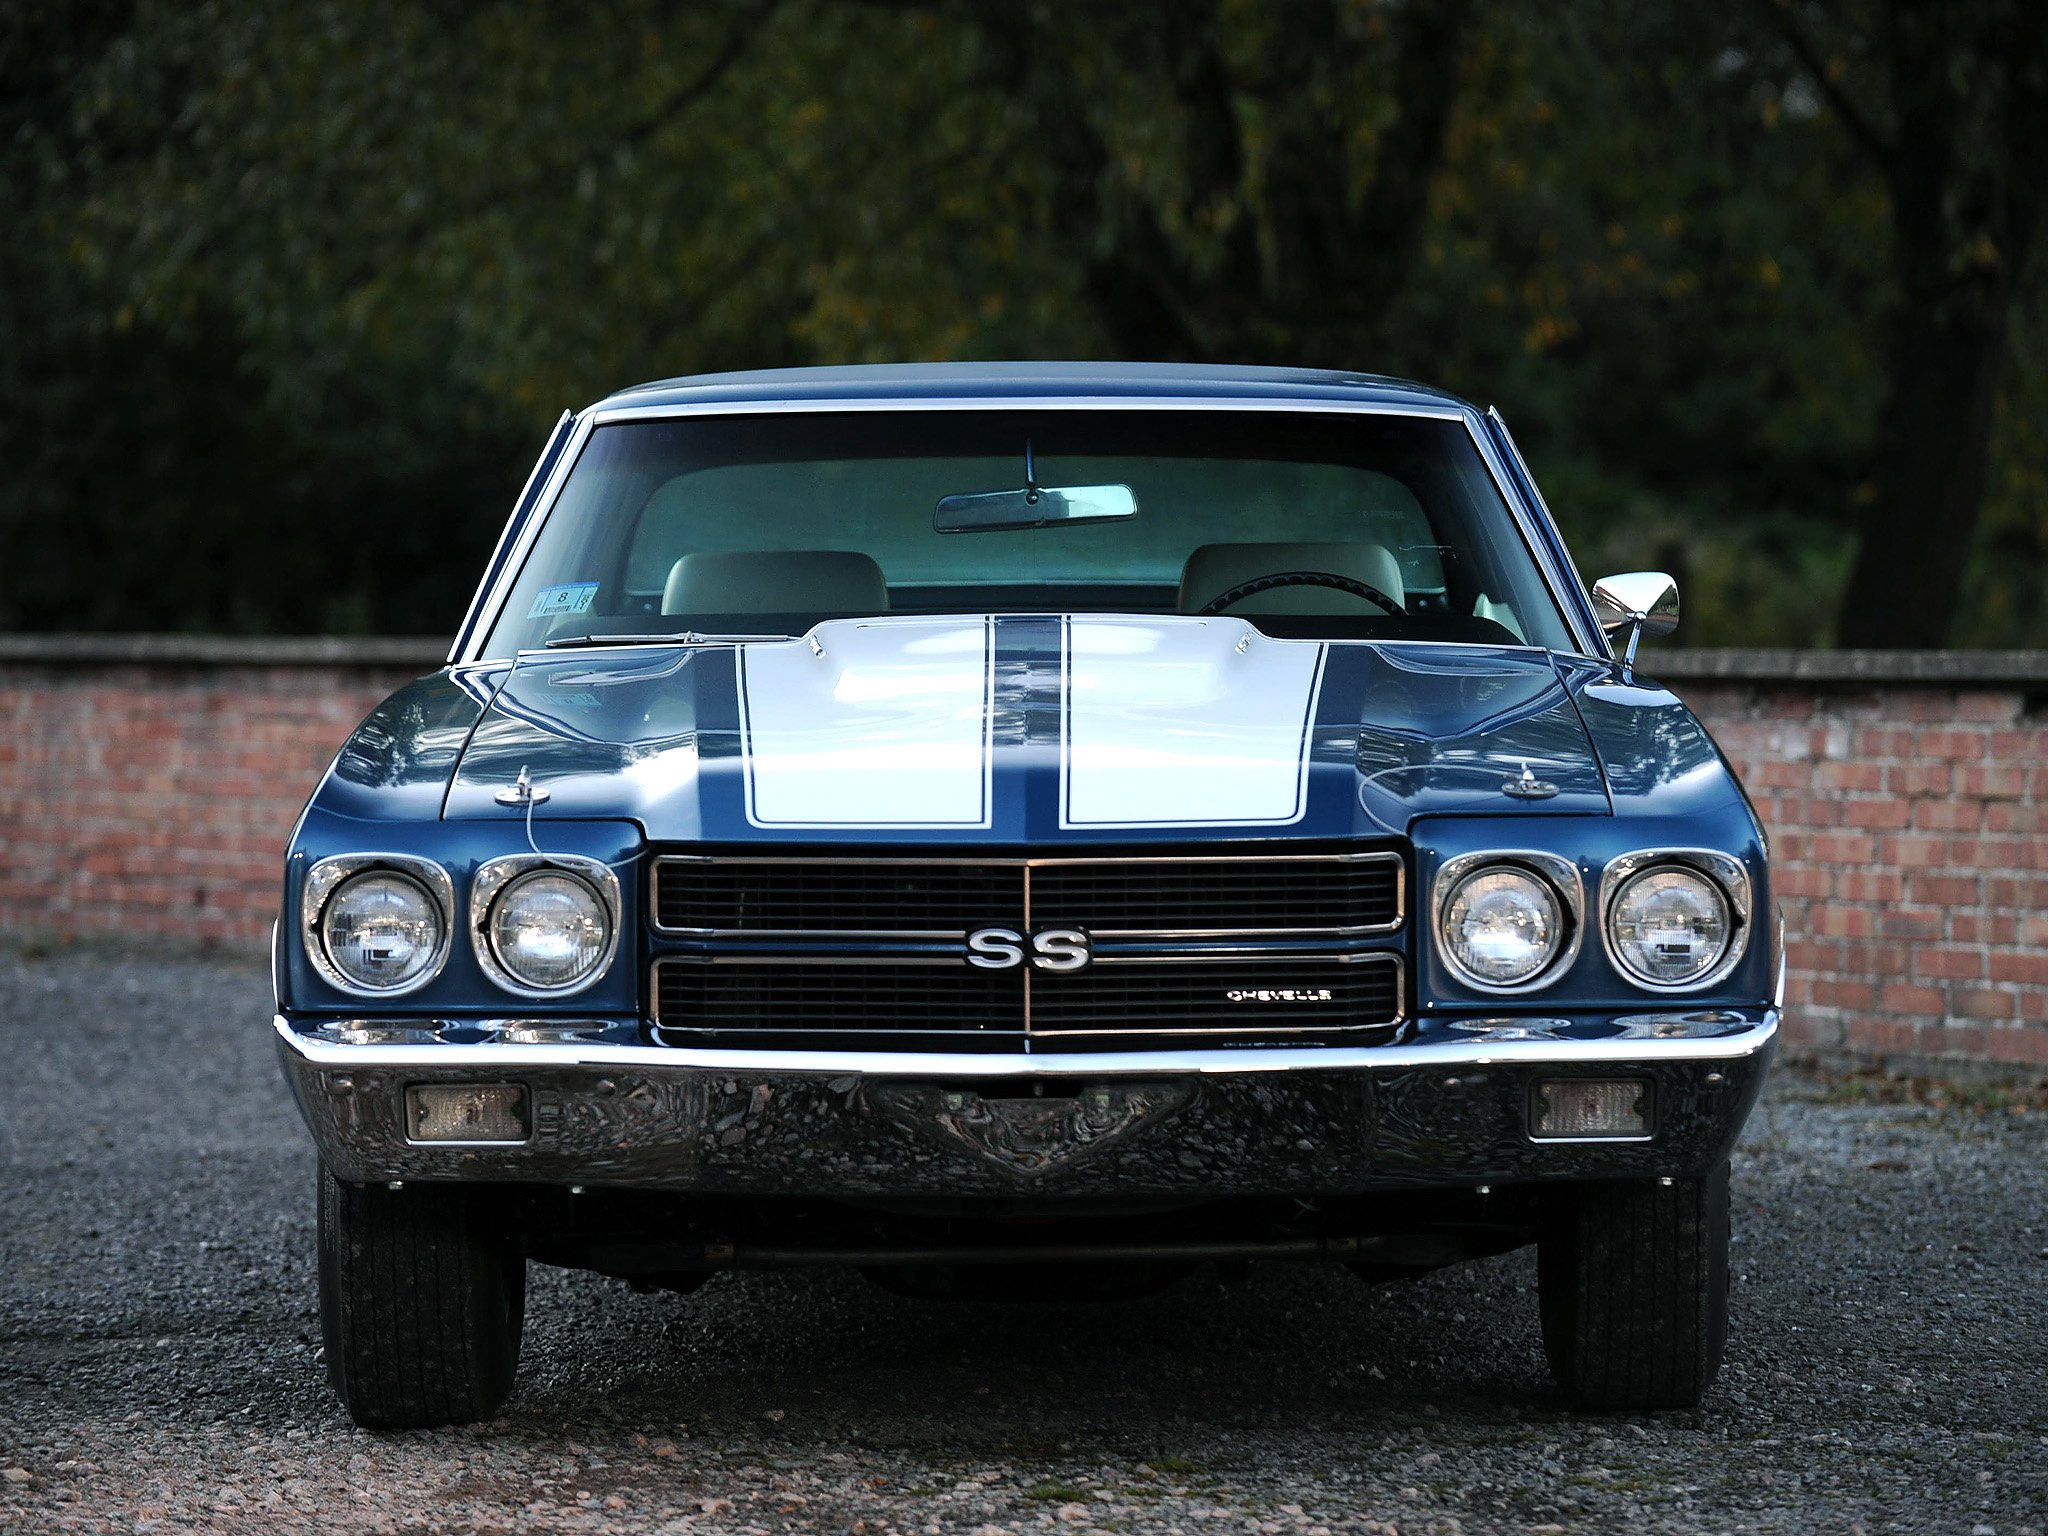 1970, Chevrolet, Chevelle, S s, 396, Hardtop, Coupe, Muscle, Classic Wallpaper